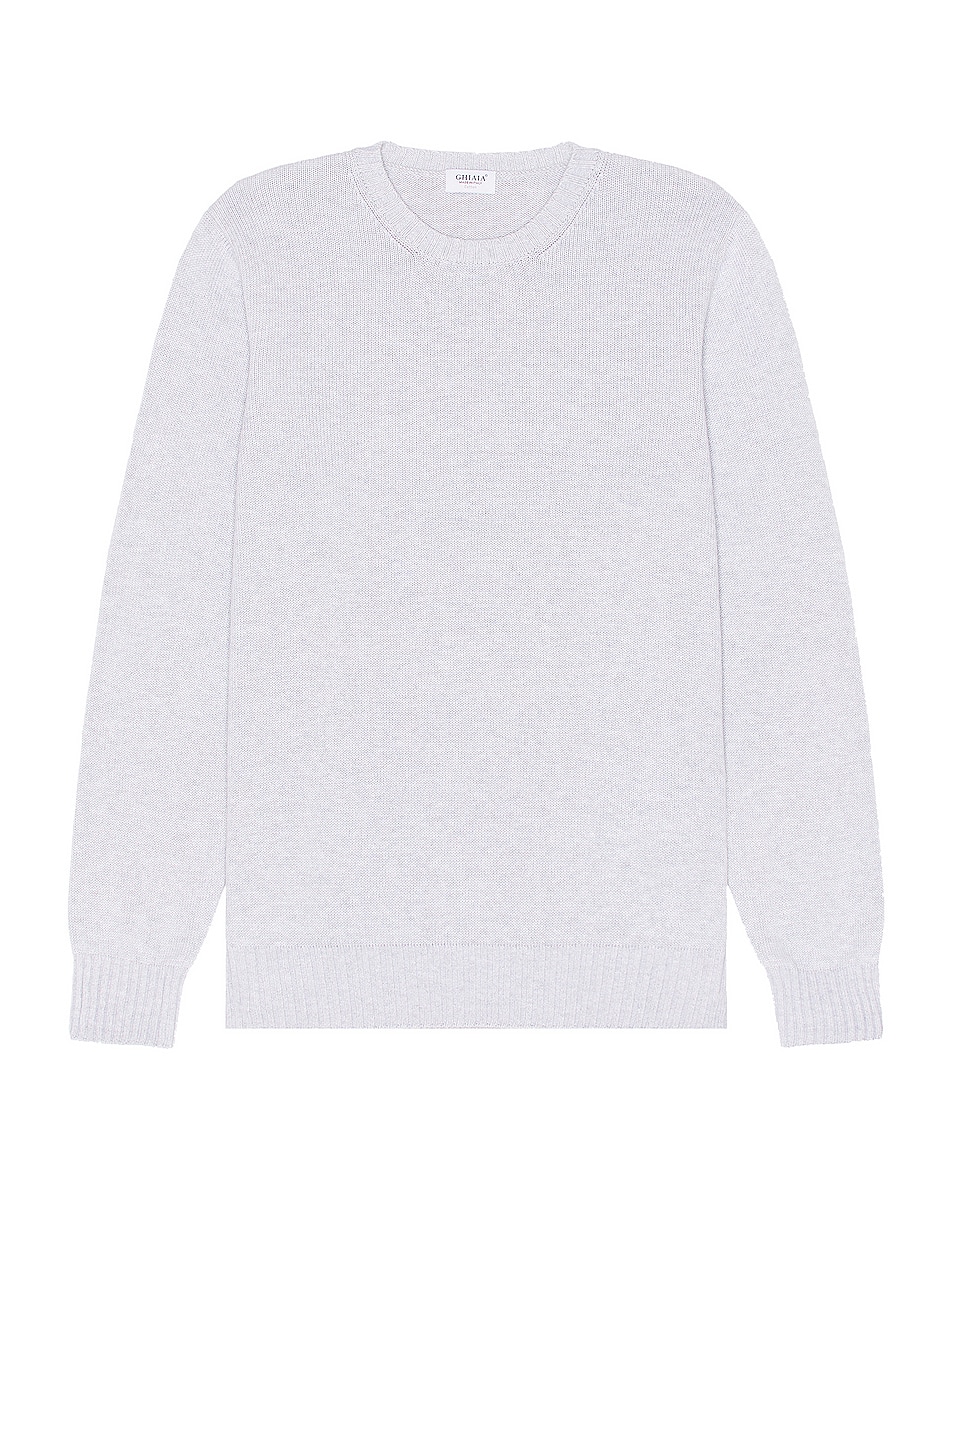 Image 1 of Ghiaia Cashmere Cotton Sweater in Light Grey